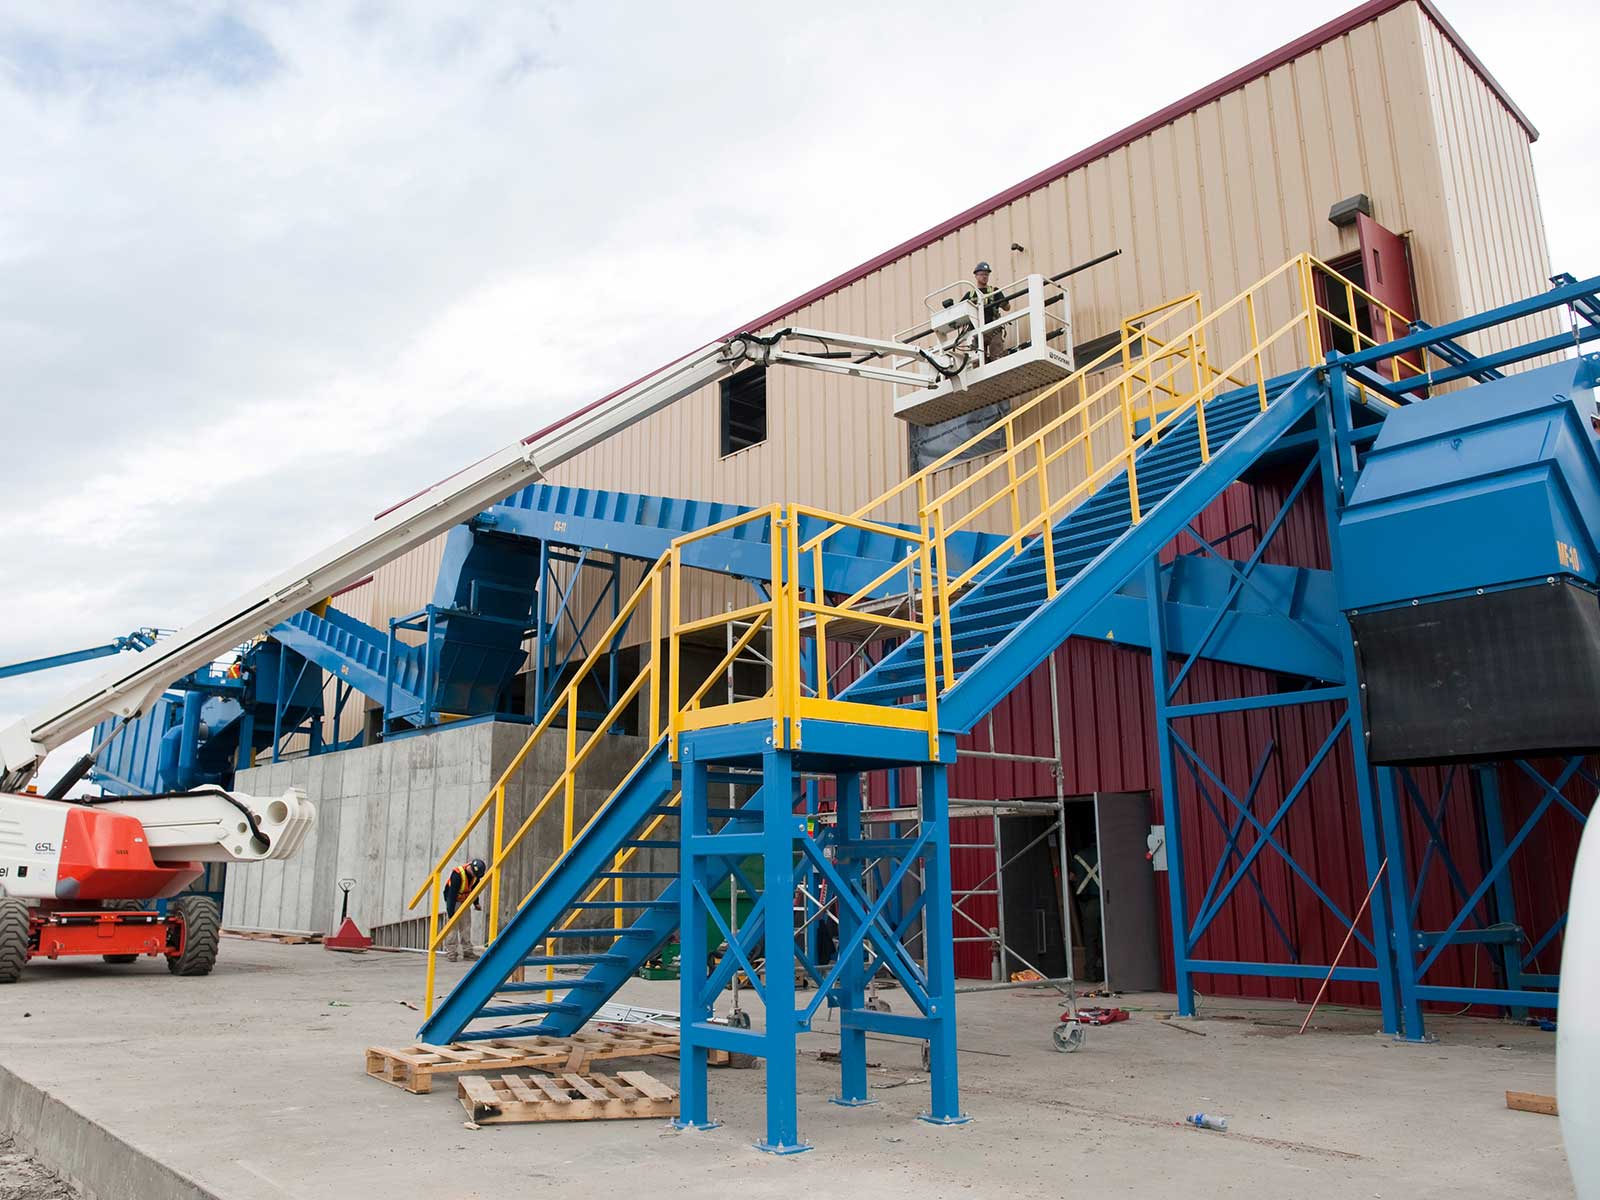 2012 - Recycling Facility for Construction & Demolition Waste Opens